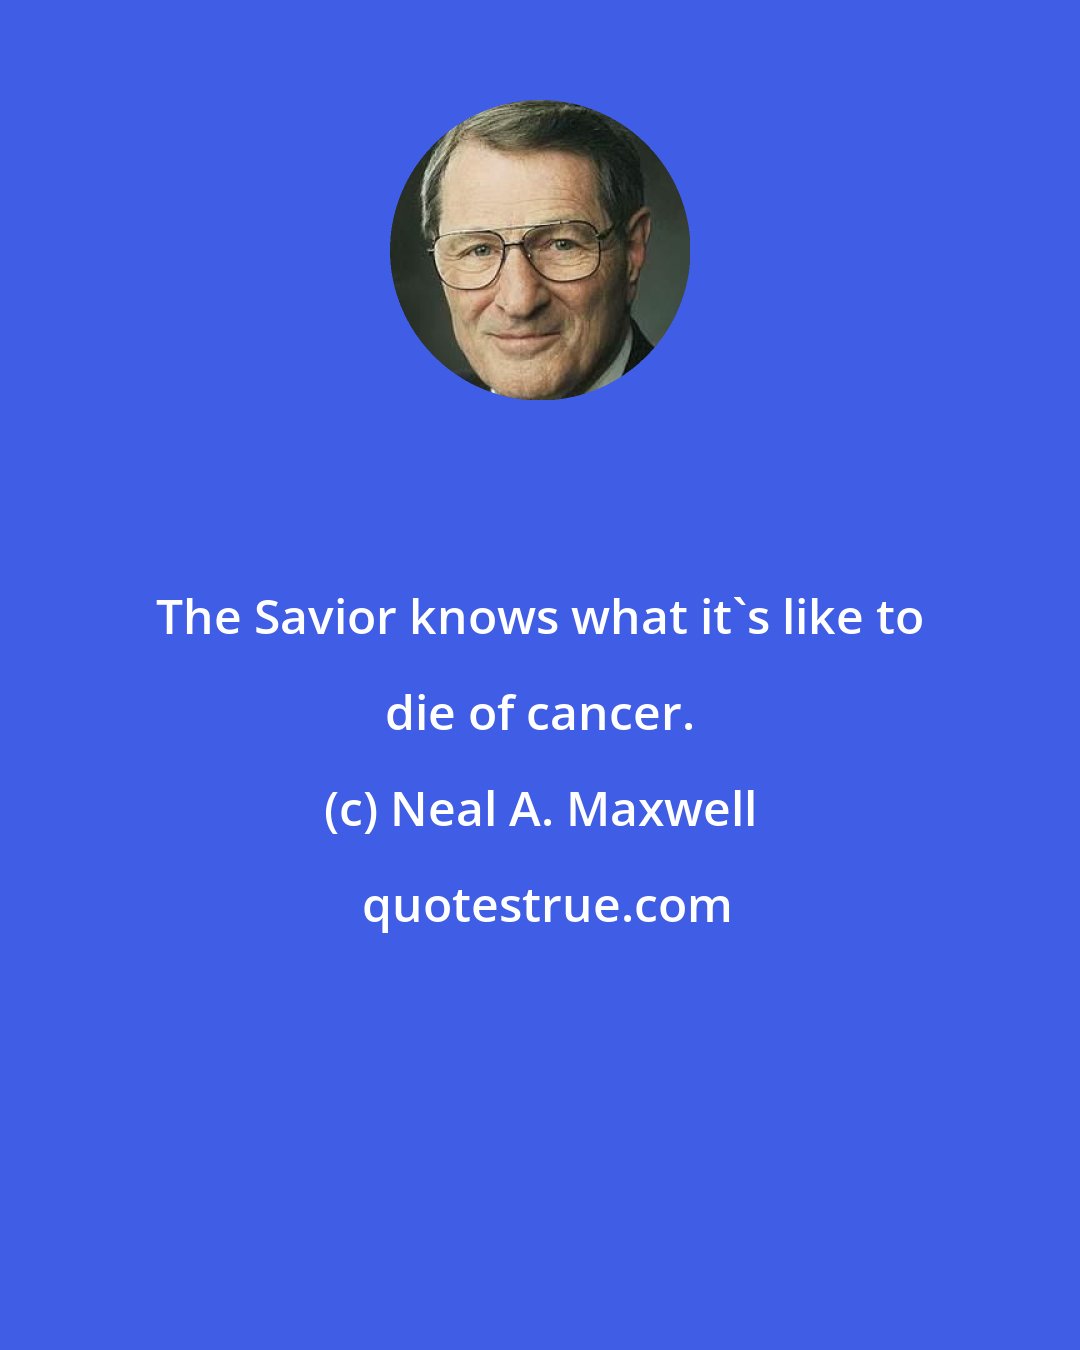 Neal A. Maxwell: The Savior knows what it's like to die of cancer.